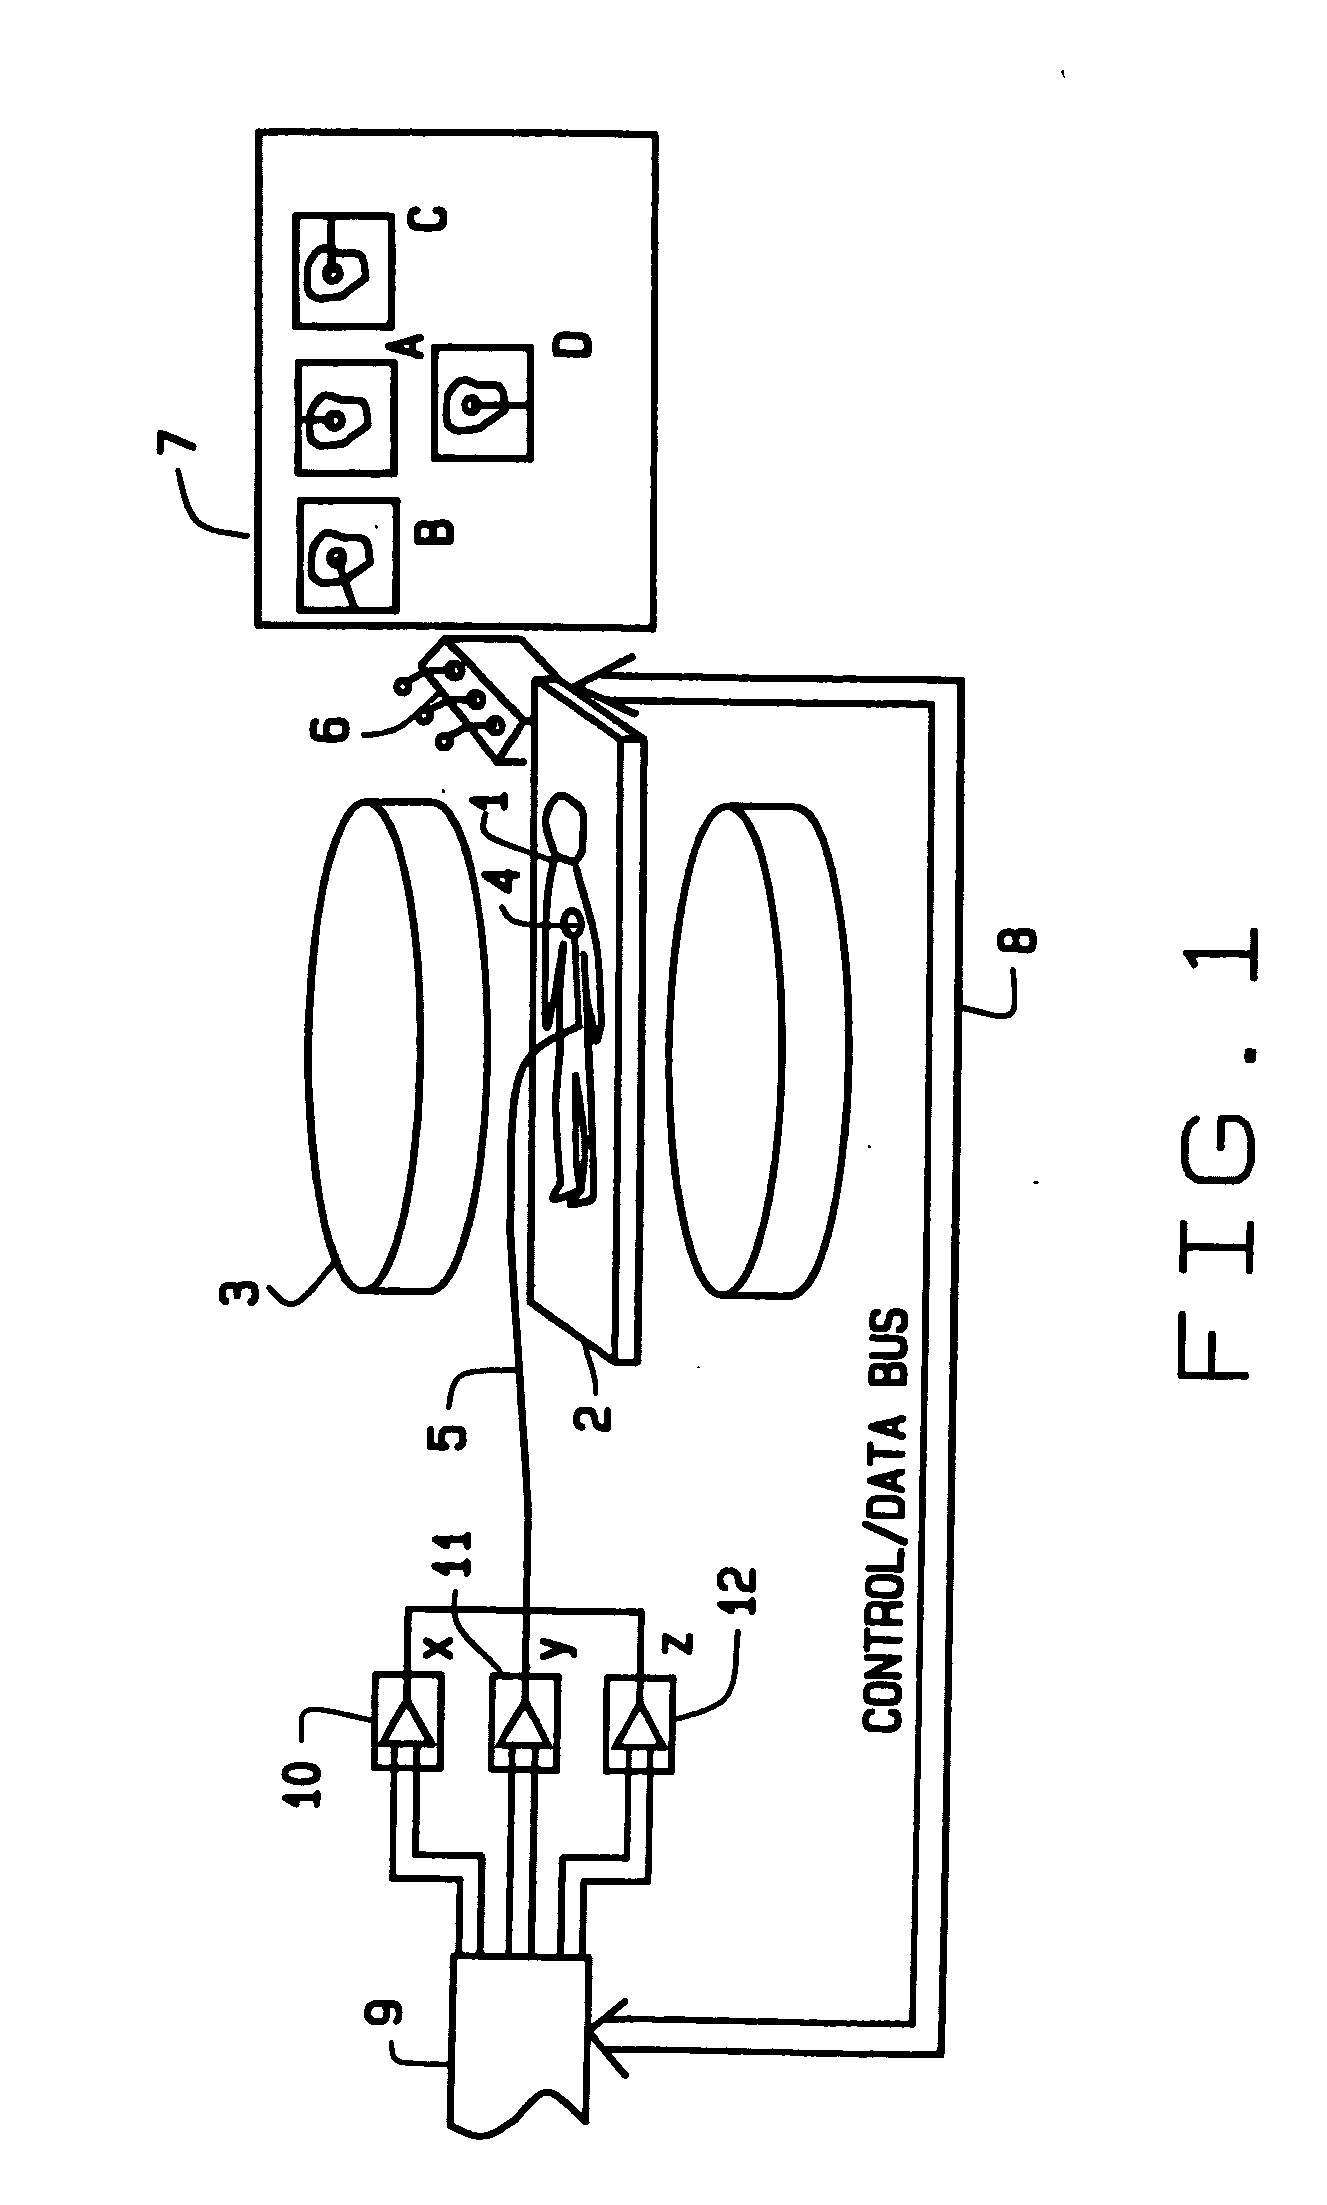 Catheter navigation within an MR imaging device